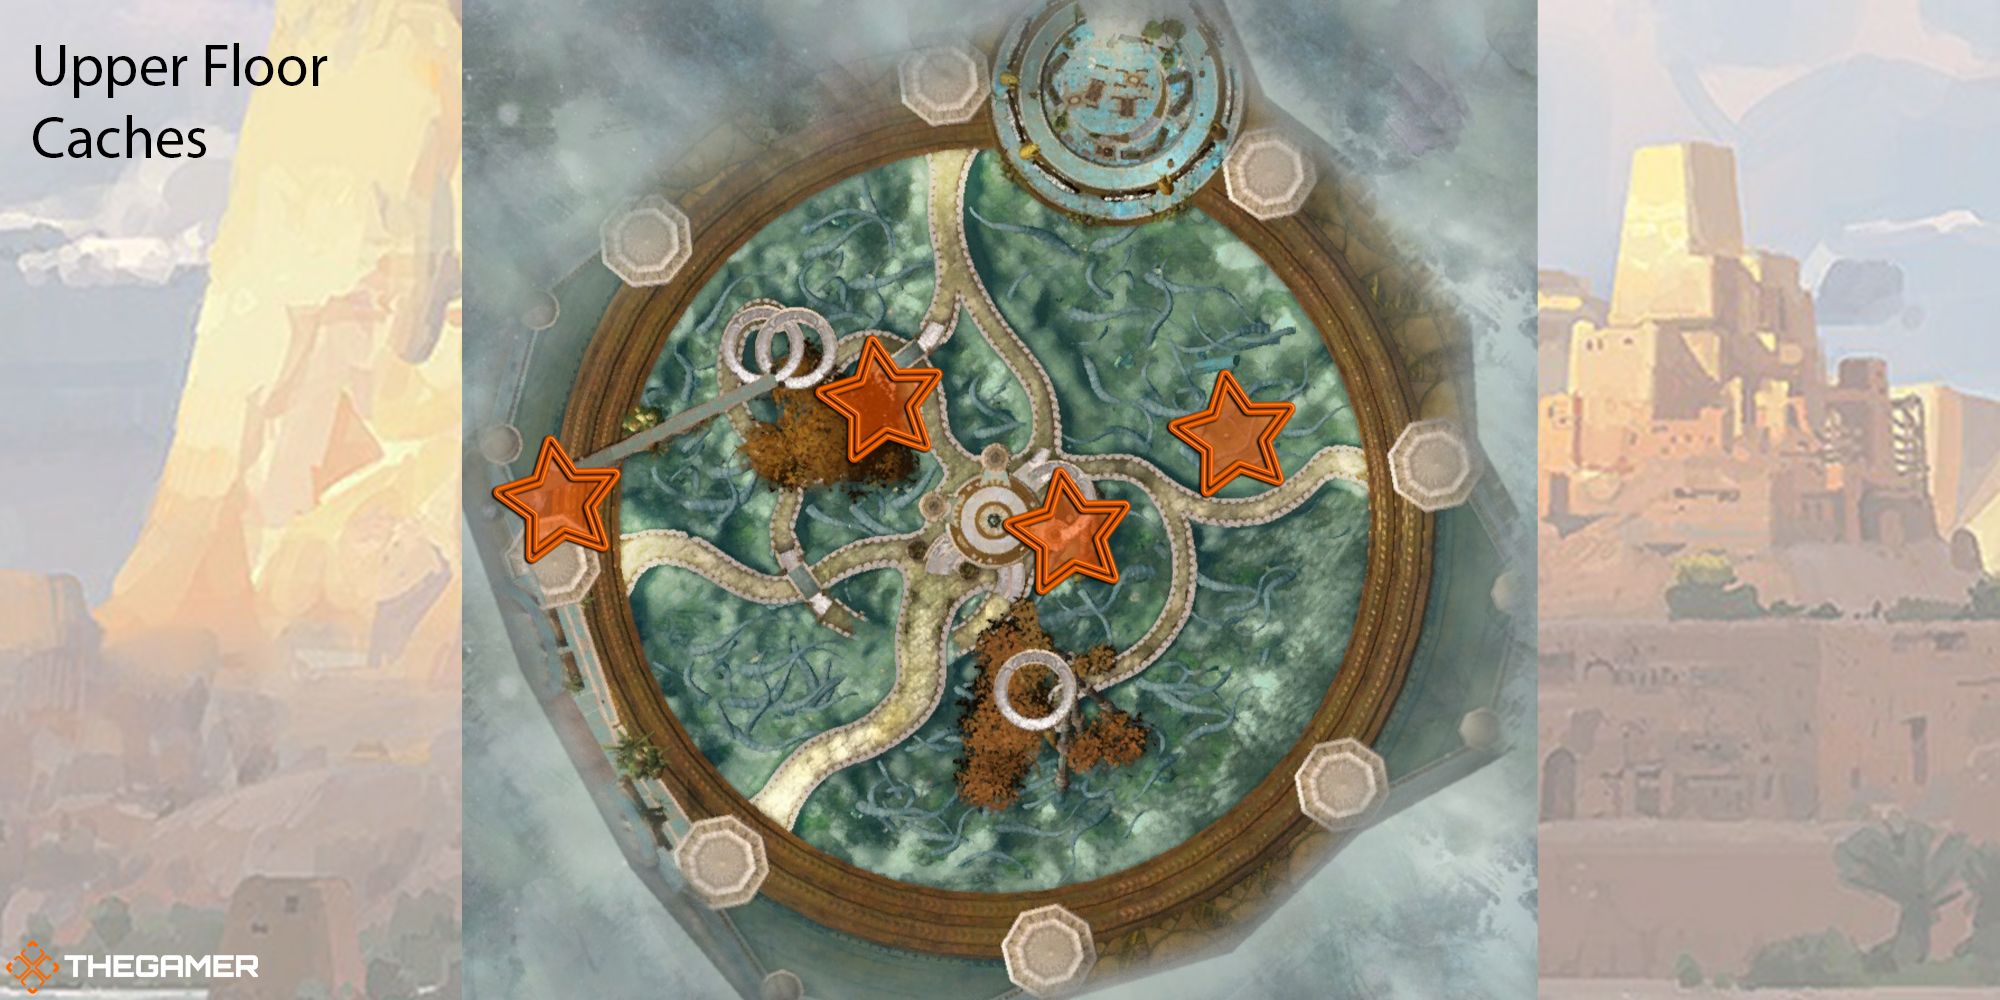 Guild Wars 2 - location of the Caches on the Upper Floor of the Dark Library